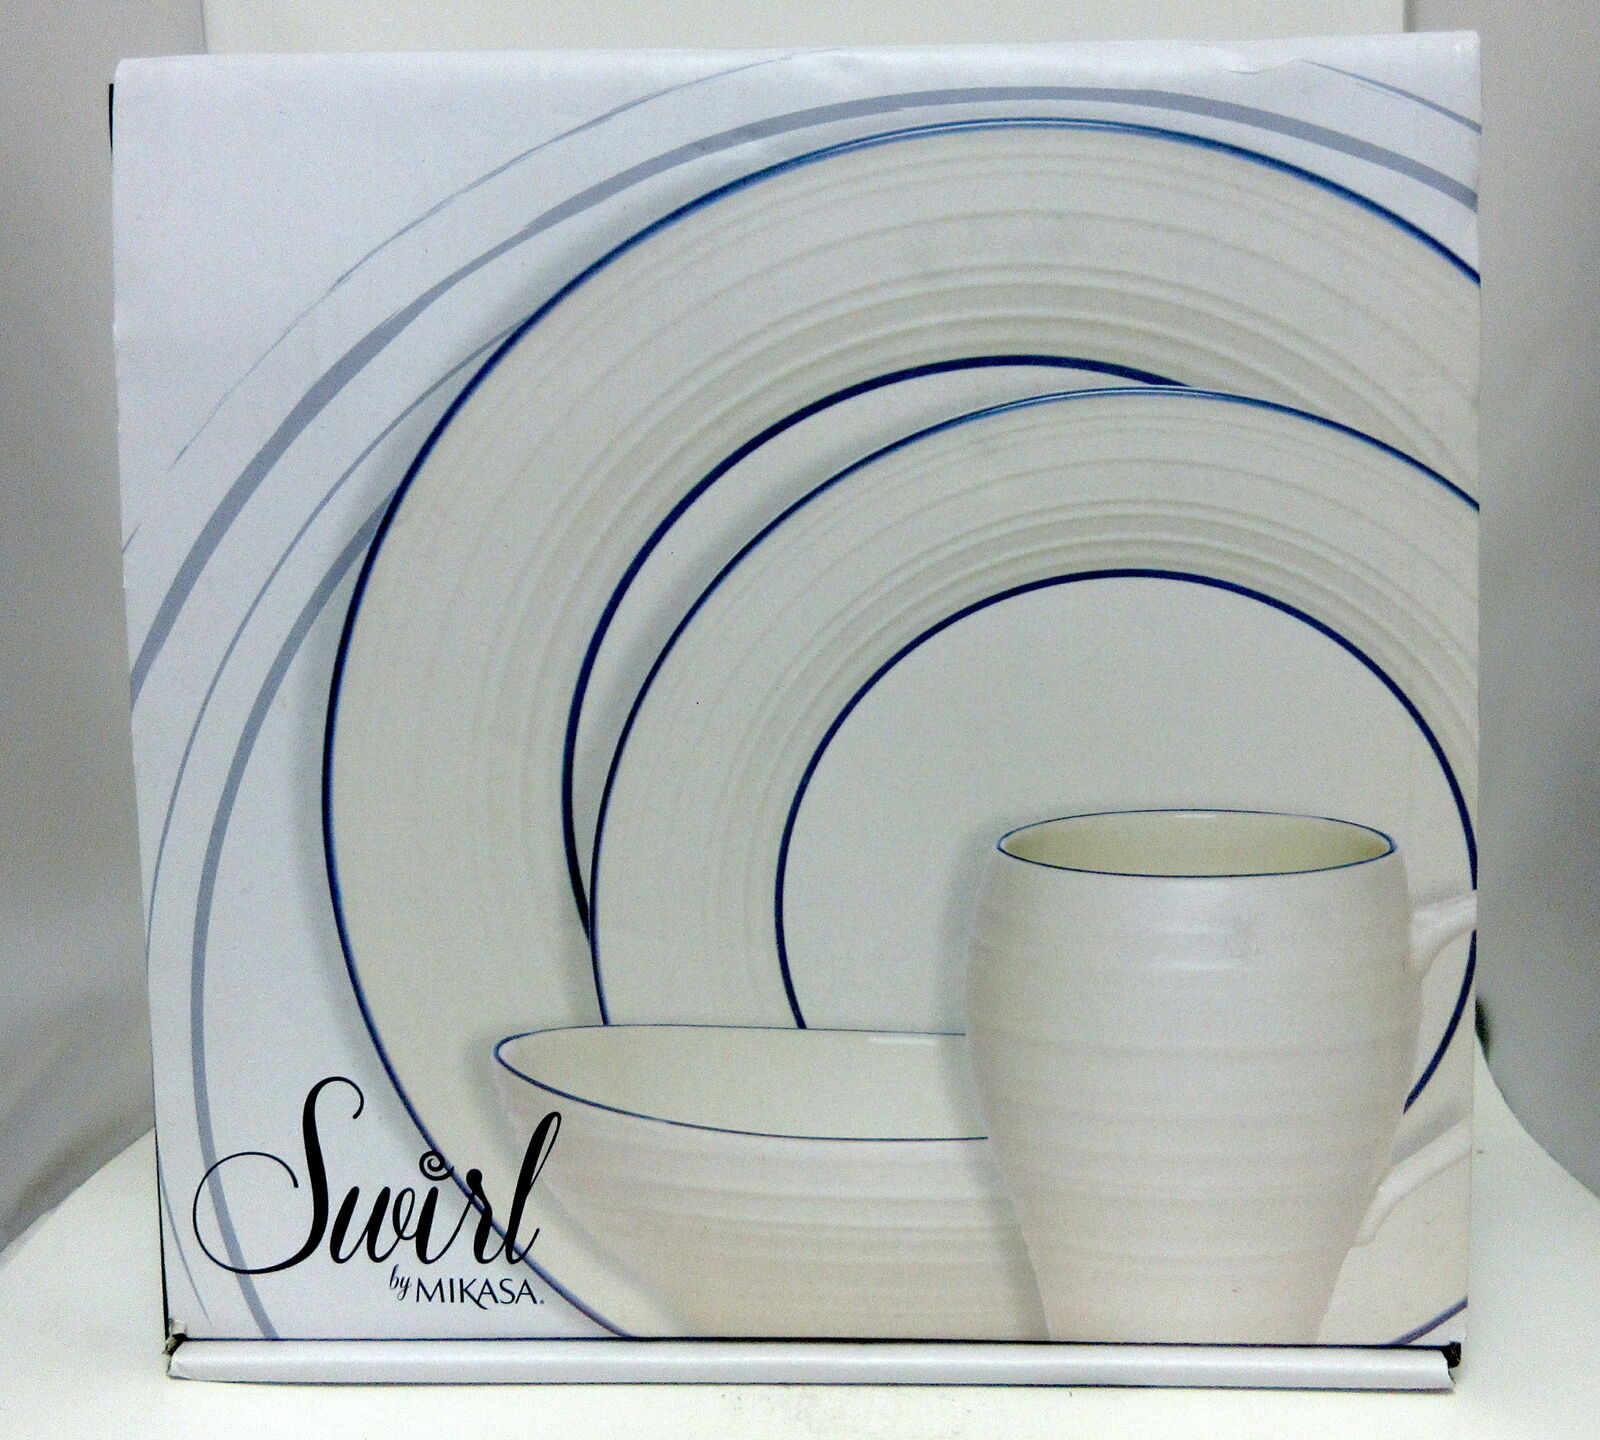 Mikasa - Swirl Banded Blue #5158432 4-piece Place Setting